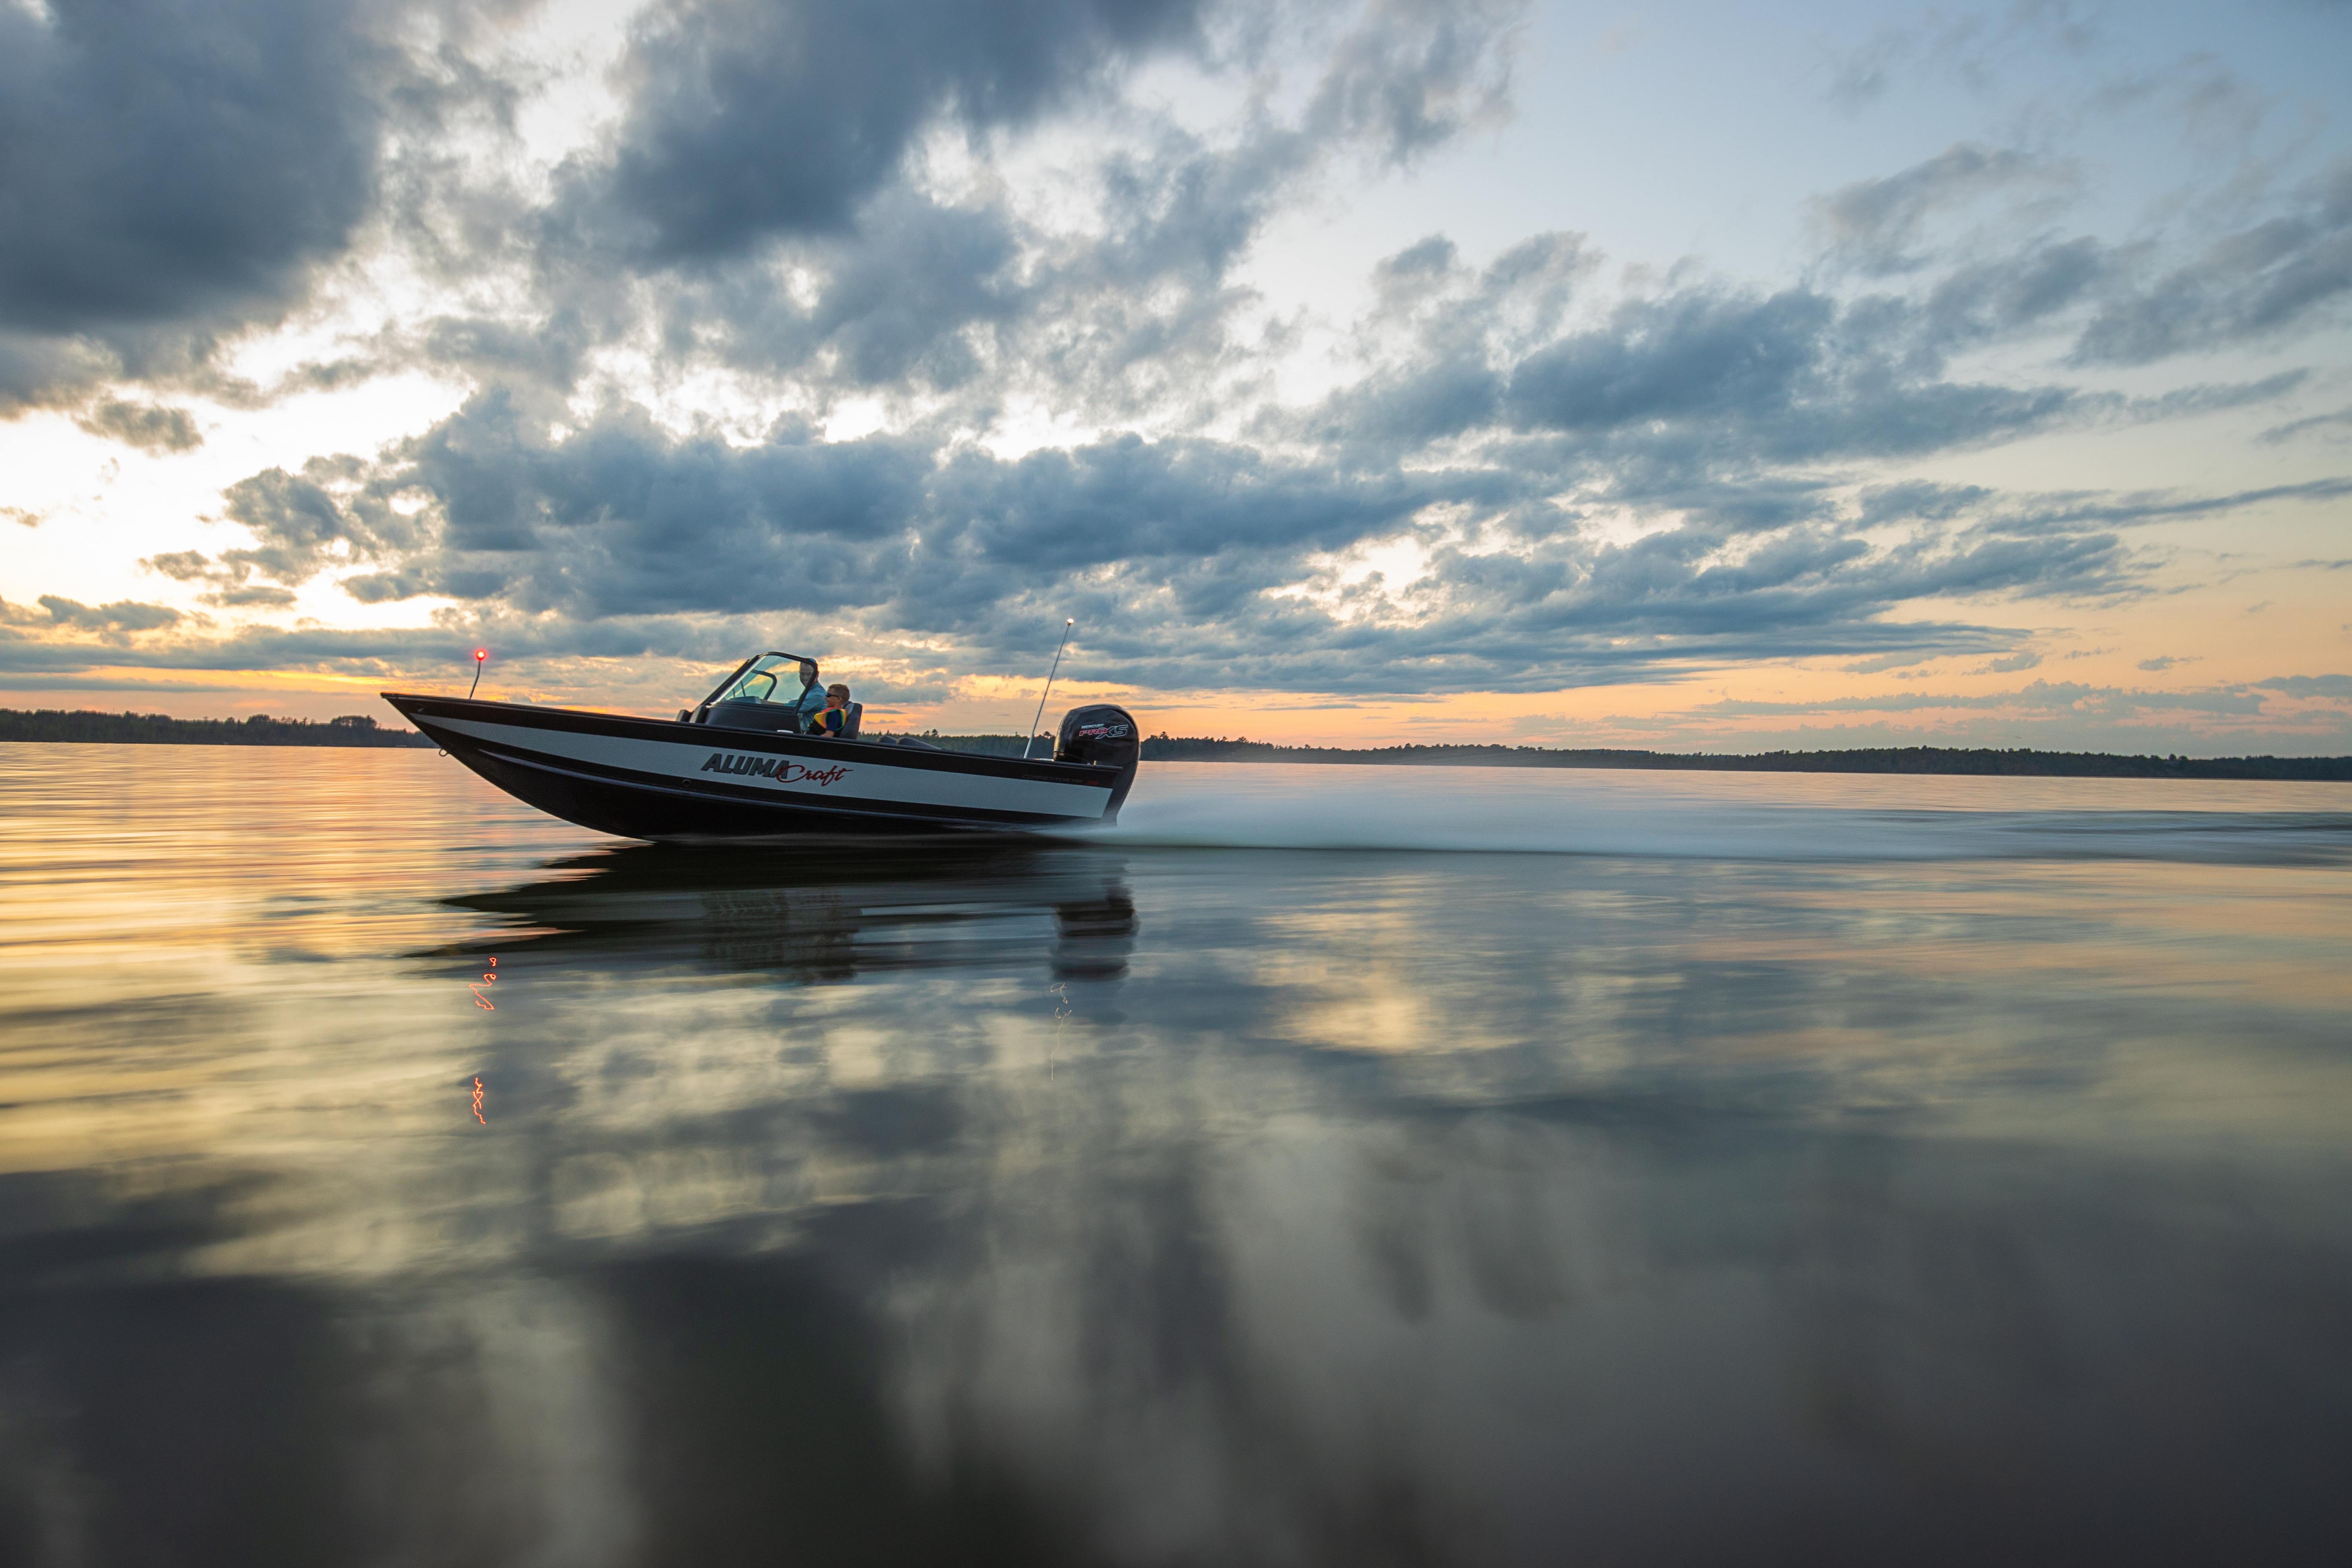 Fish Sport boat at the sunset